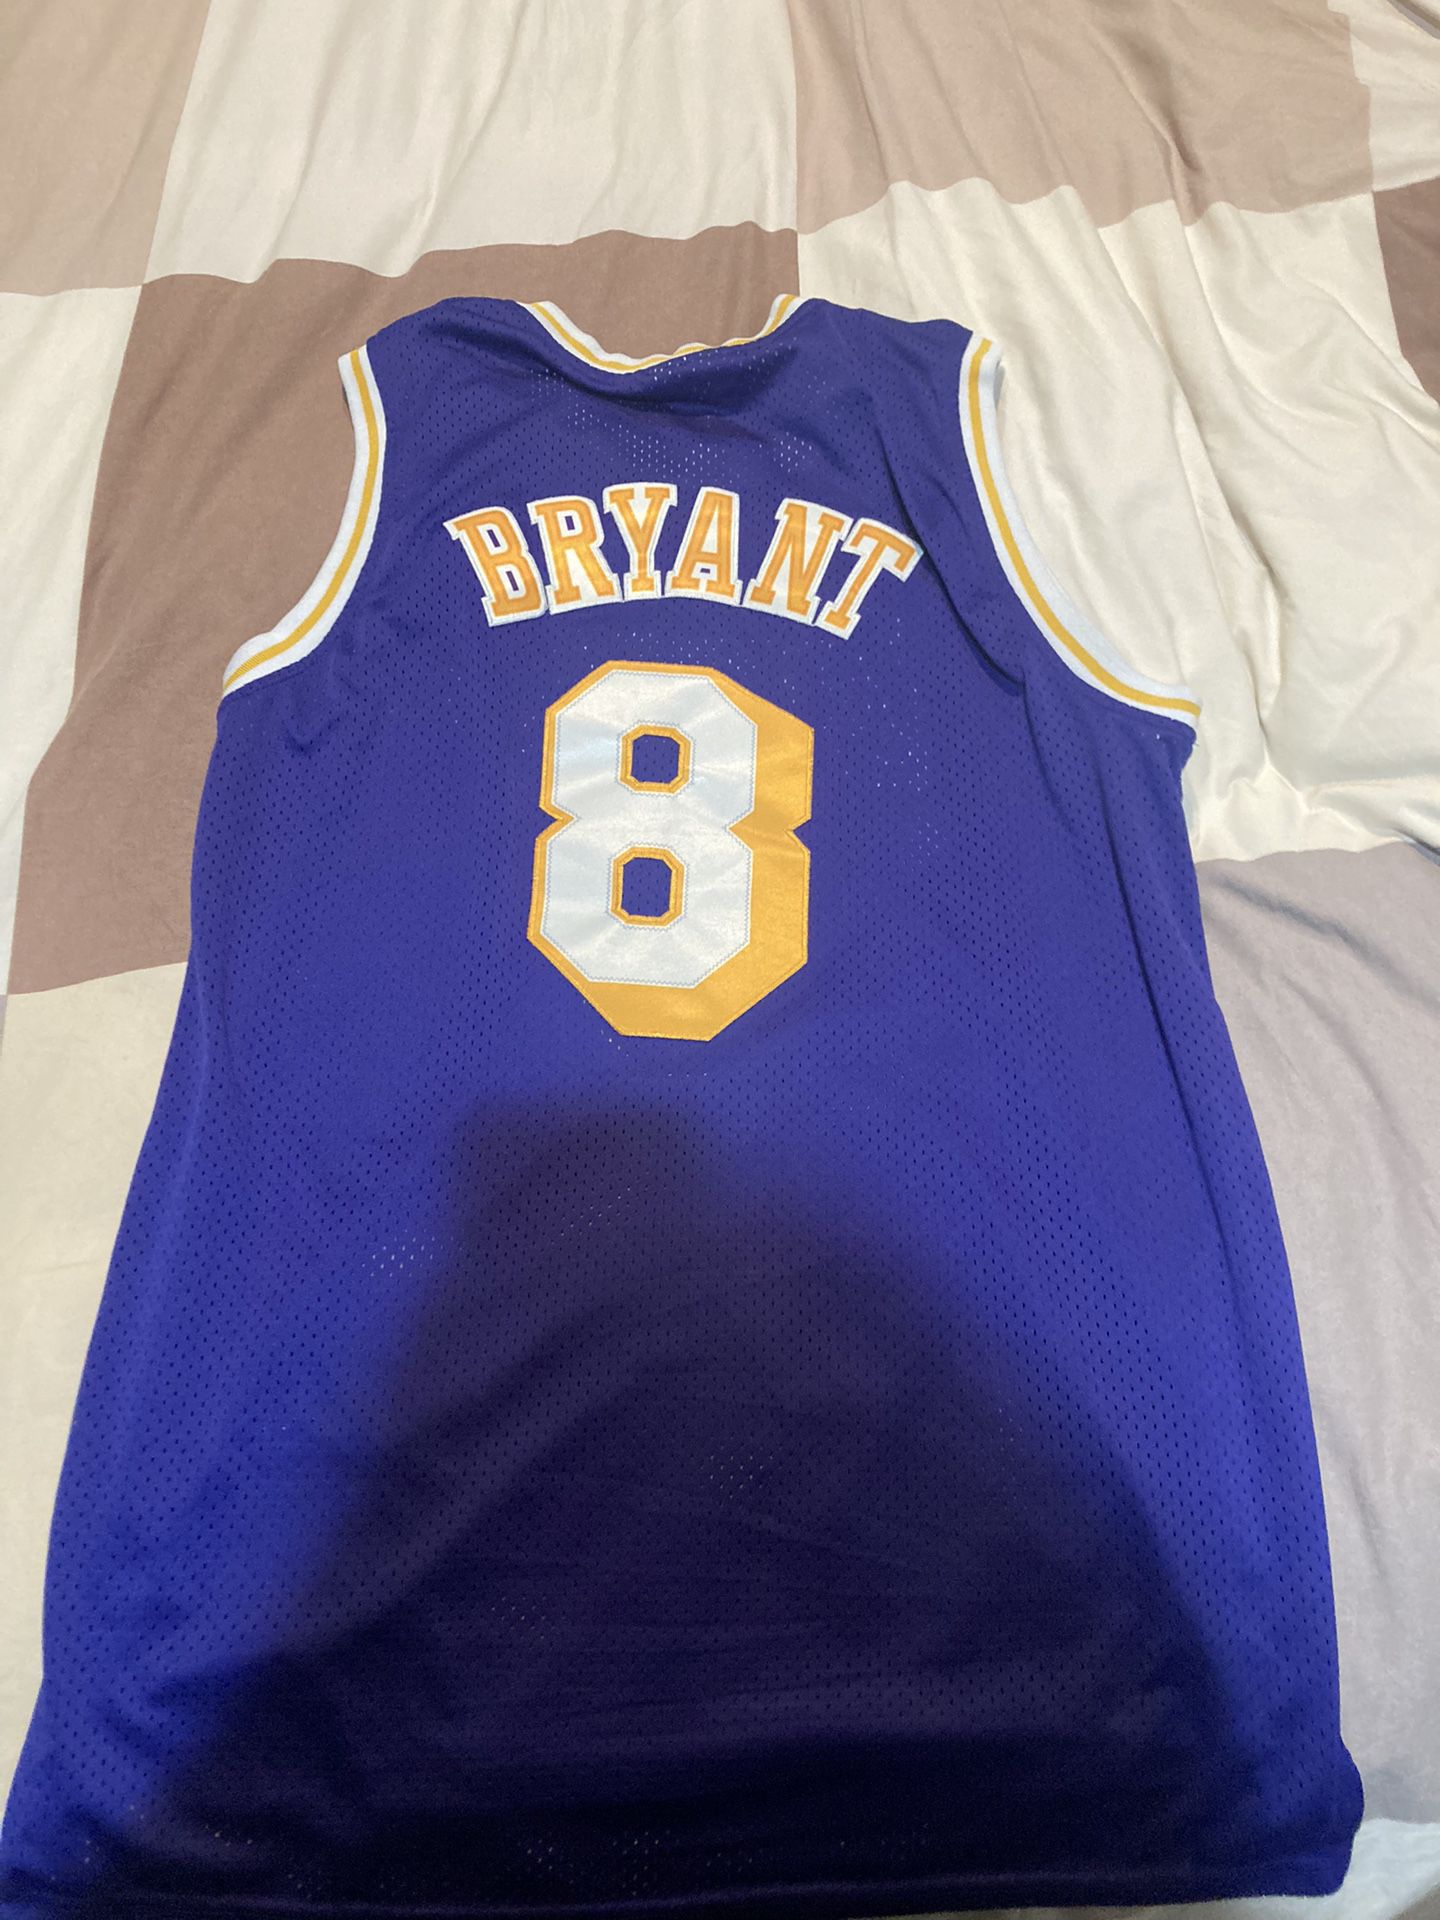 Kobe Bryant Number 8 Jersey for Sale in Long Beach, CA - OfferUp